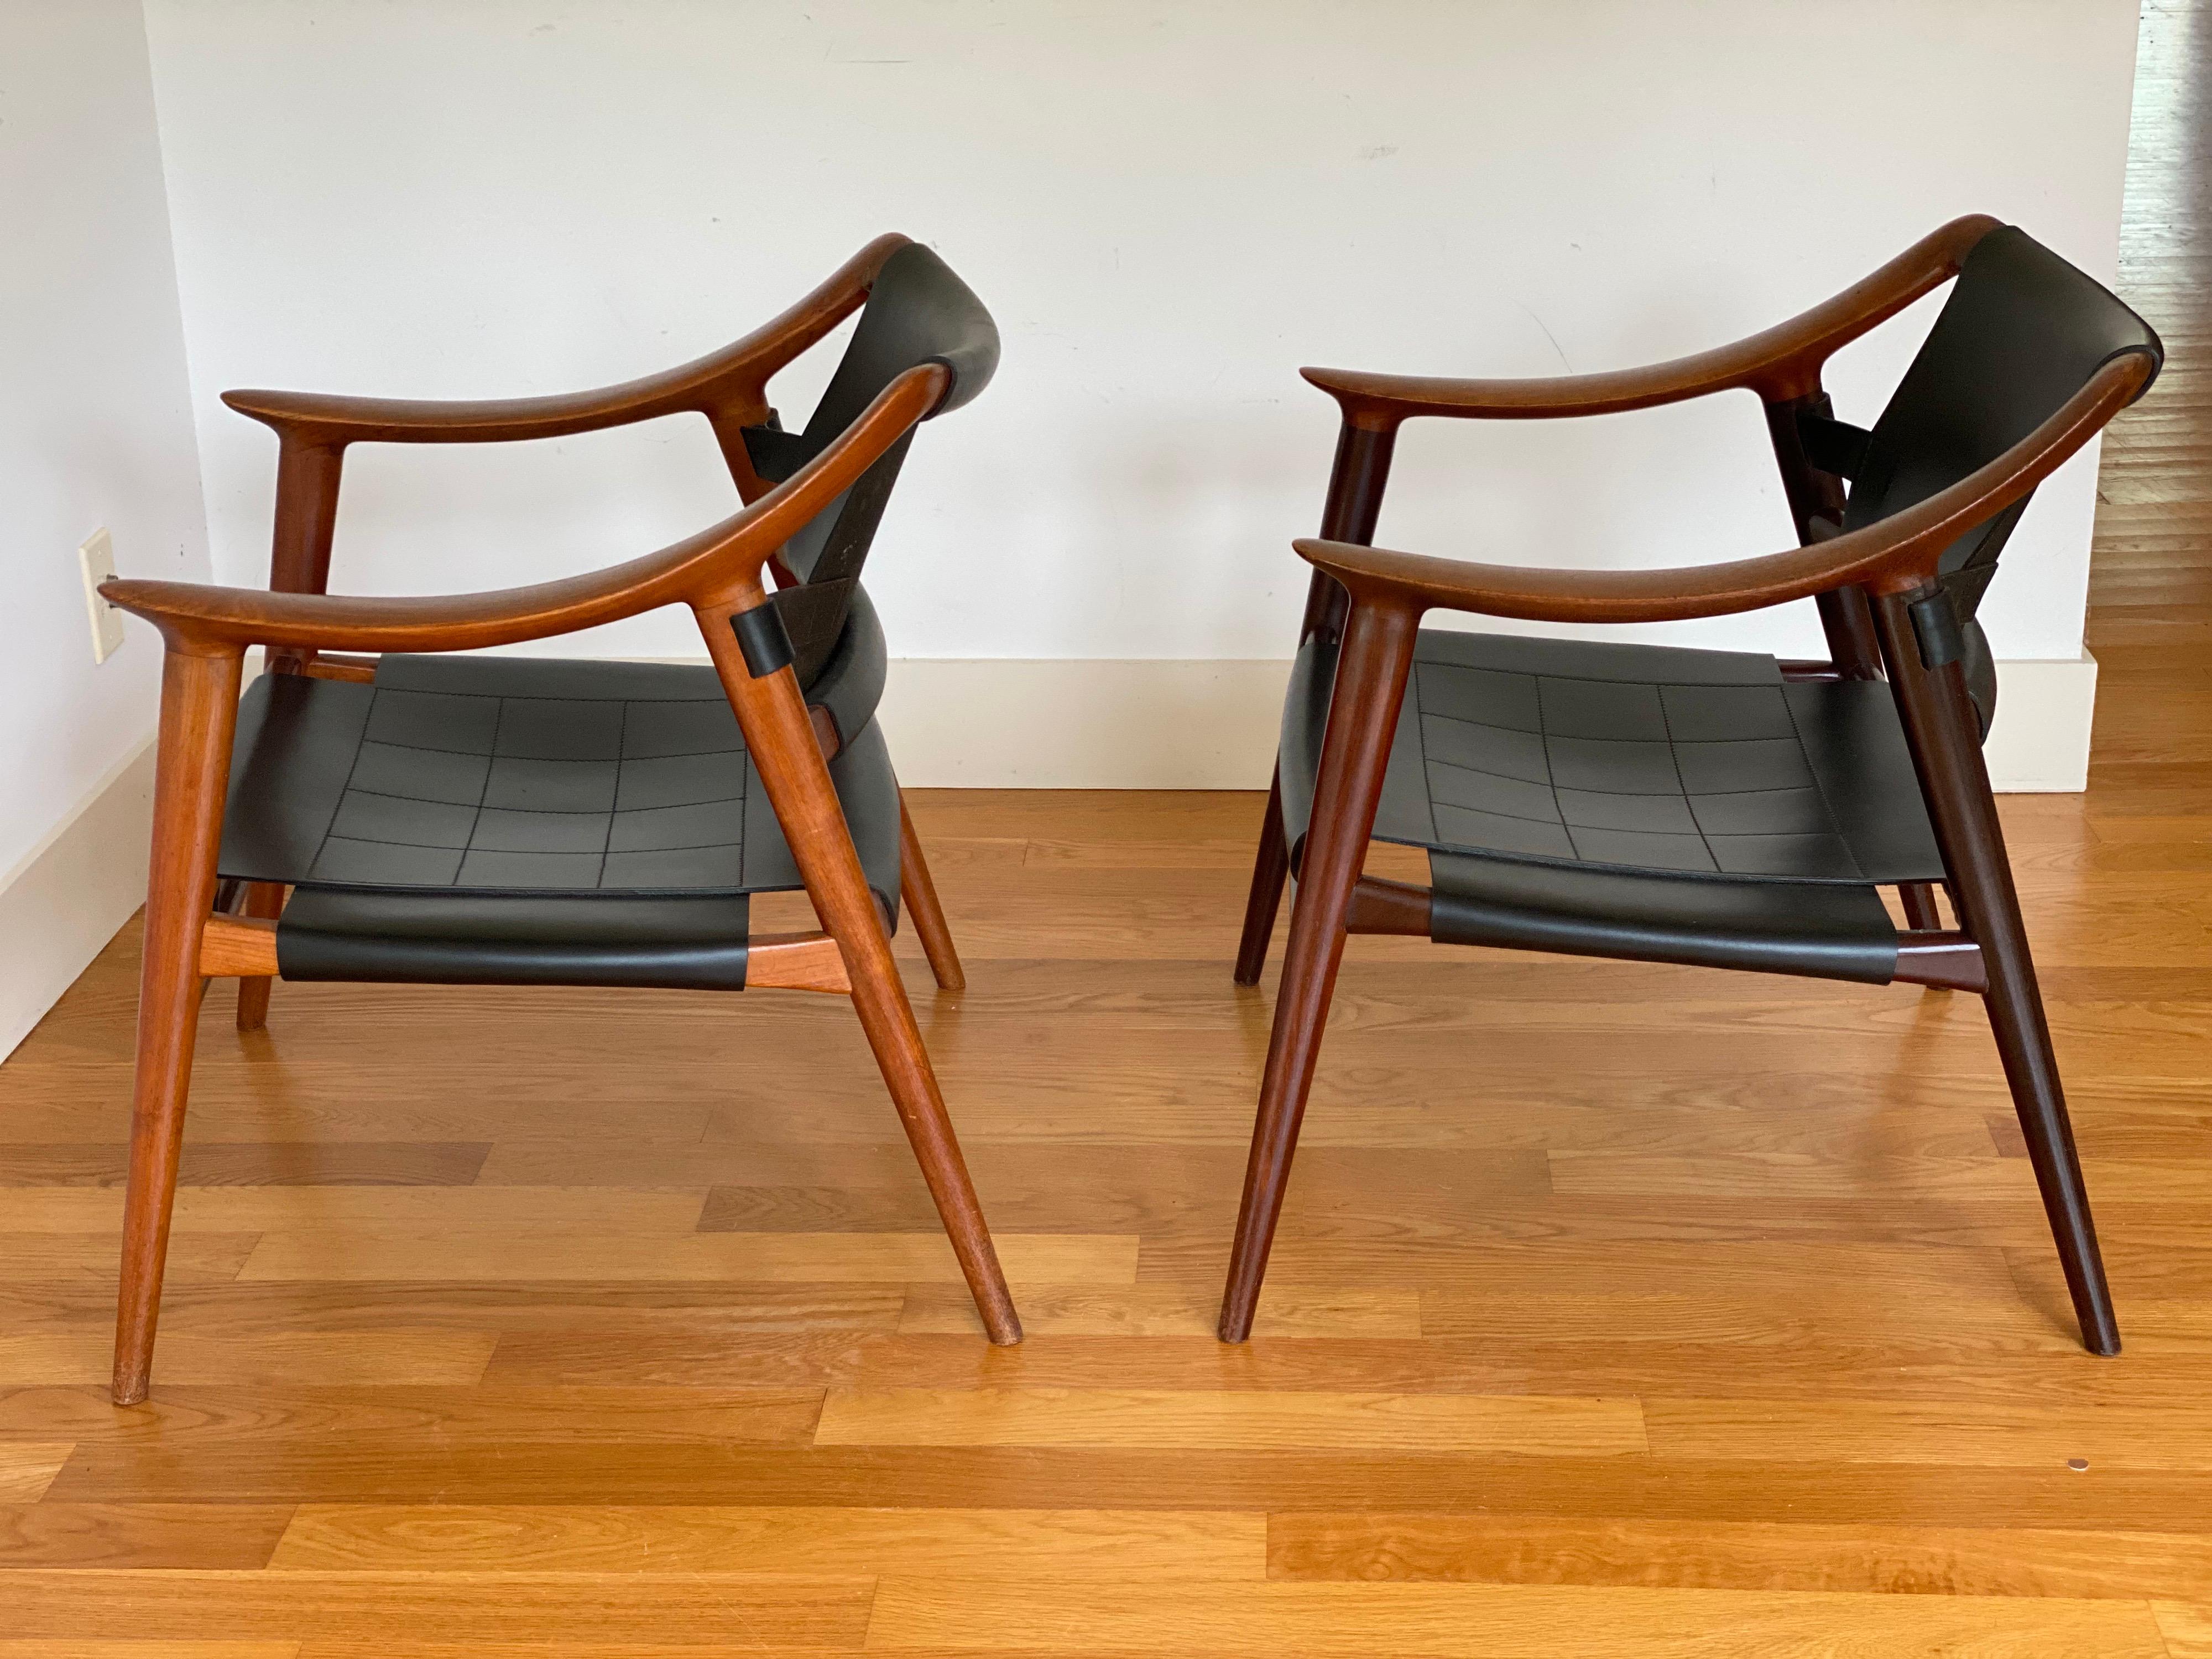 Rolf Rastad & Adolf Relling lounge chairs Model Bambi by Gustav Bahus in Norway.
Two available. Both made of teak and leather, however, one lighter due to sun fading. 
The smooth flat curved arms make these chairs both comfortable and a work of art.